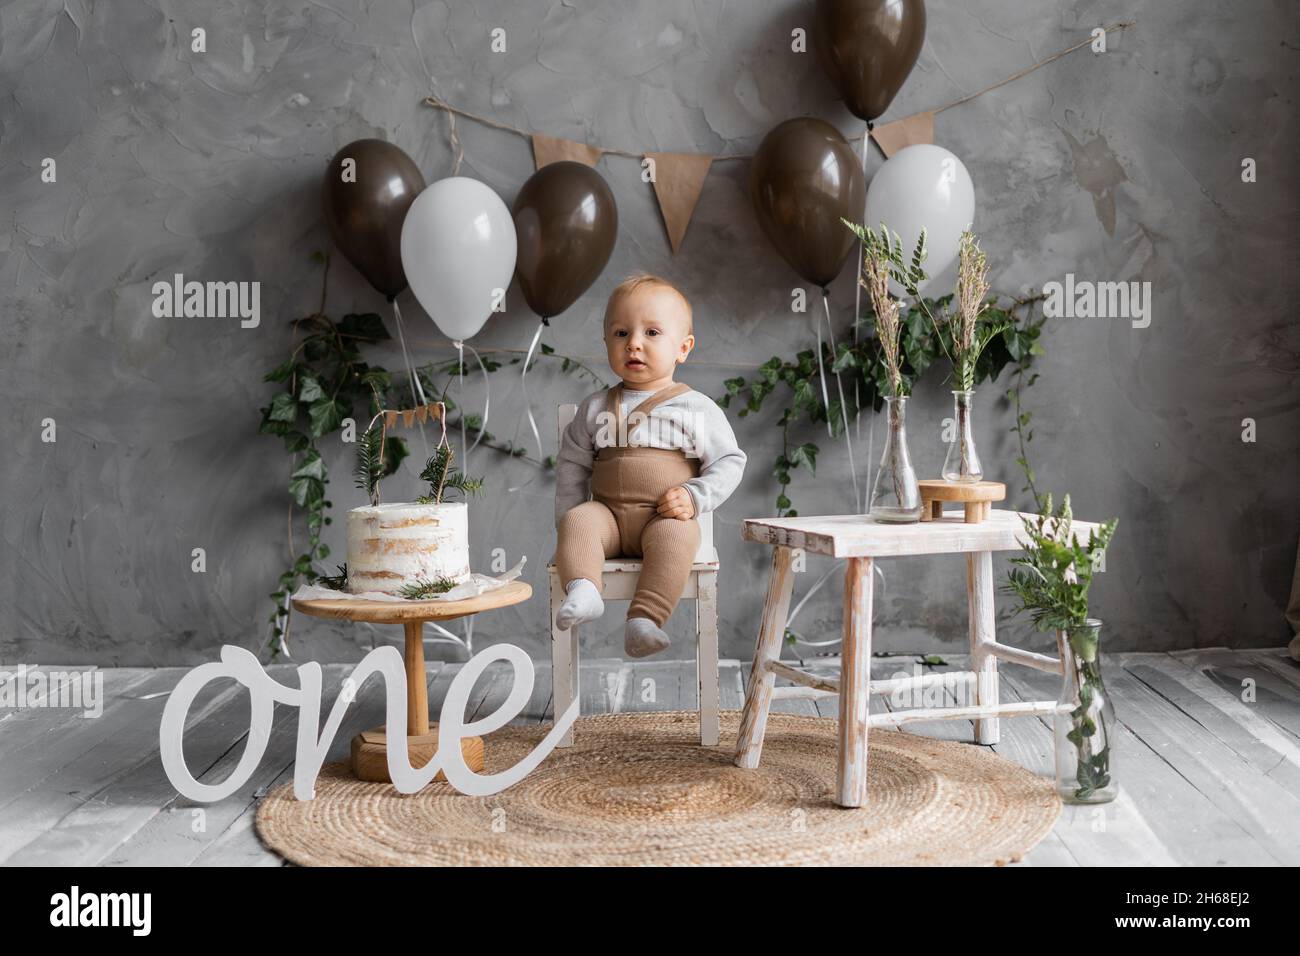 baby's birthday, natural decor for the first year, baby on the background of balloons and cake, rustic style decoration, happy baby one year holiday. Stock Photo